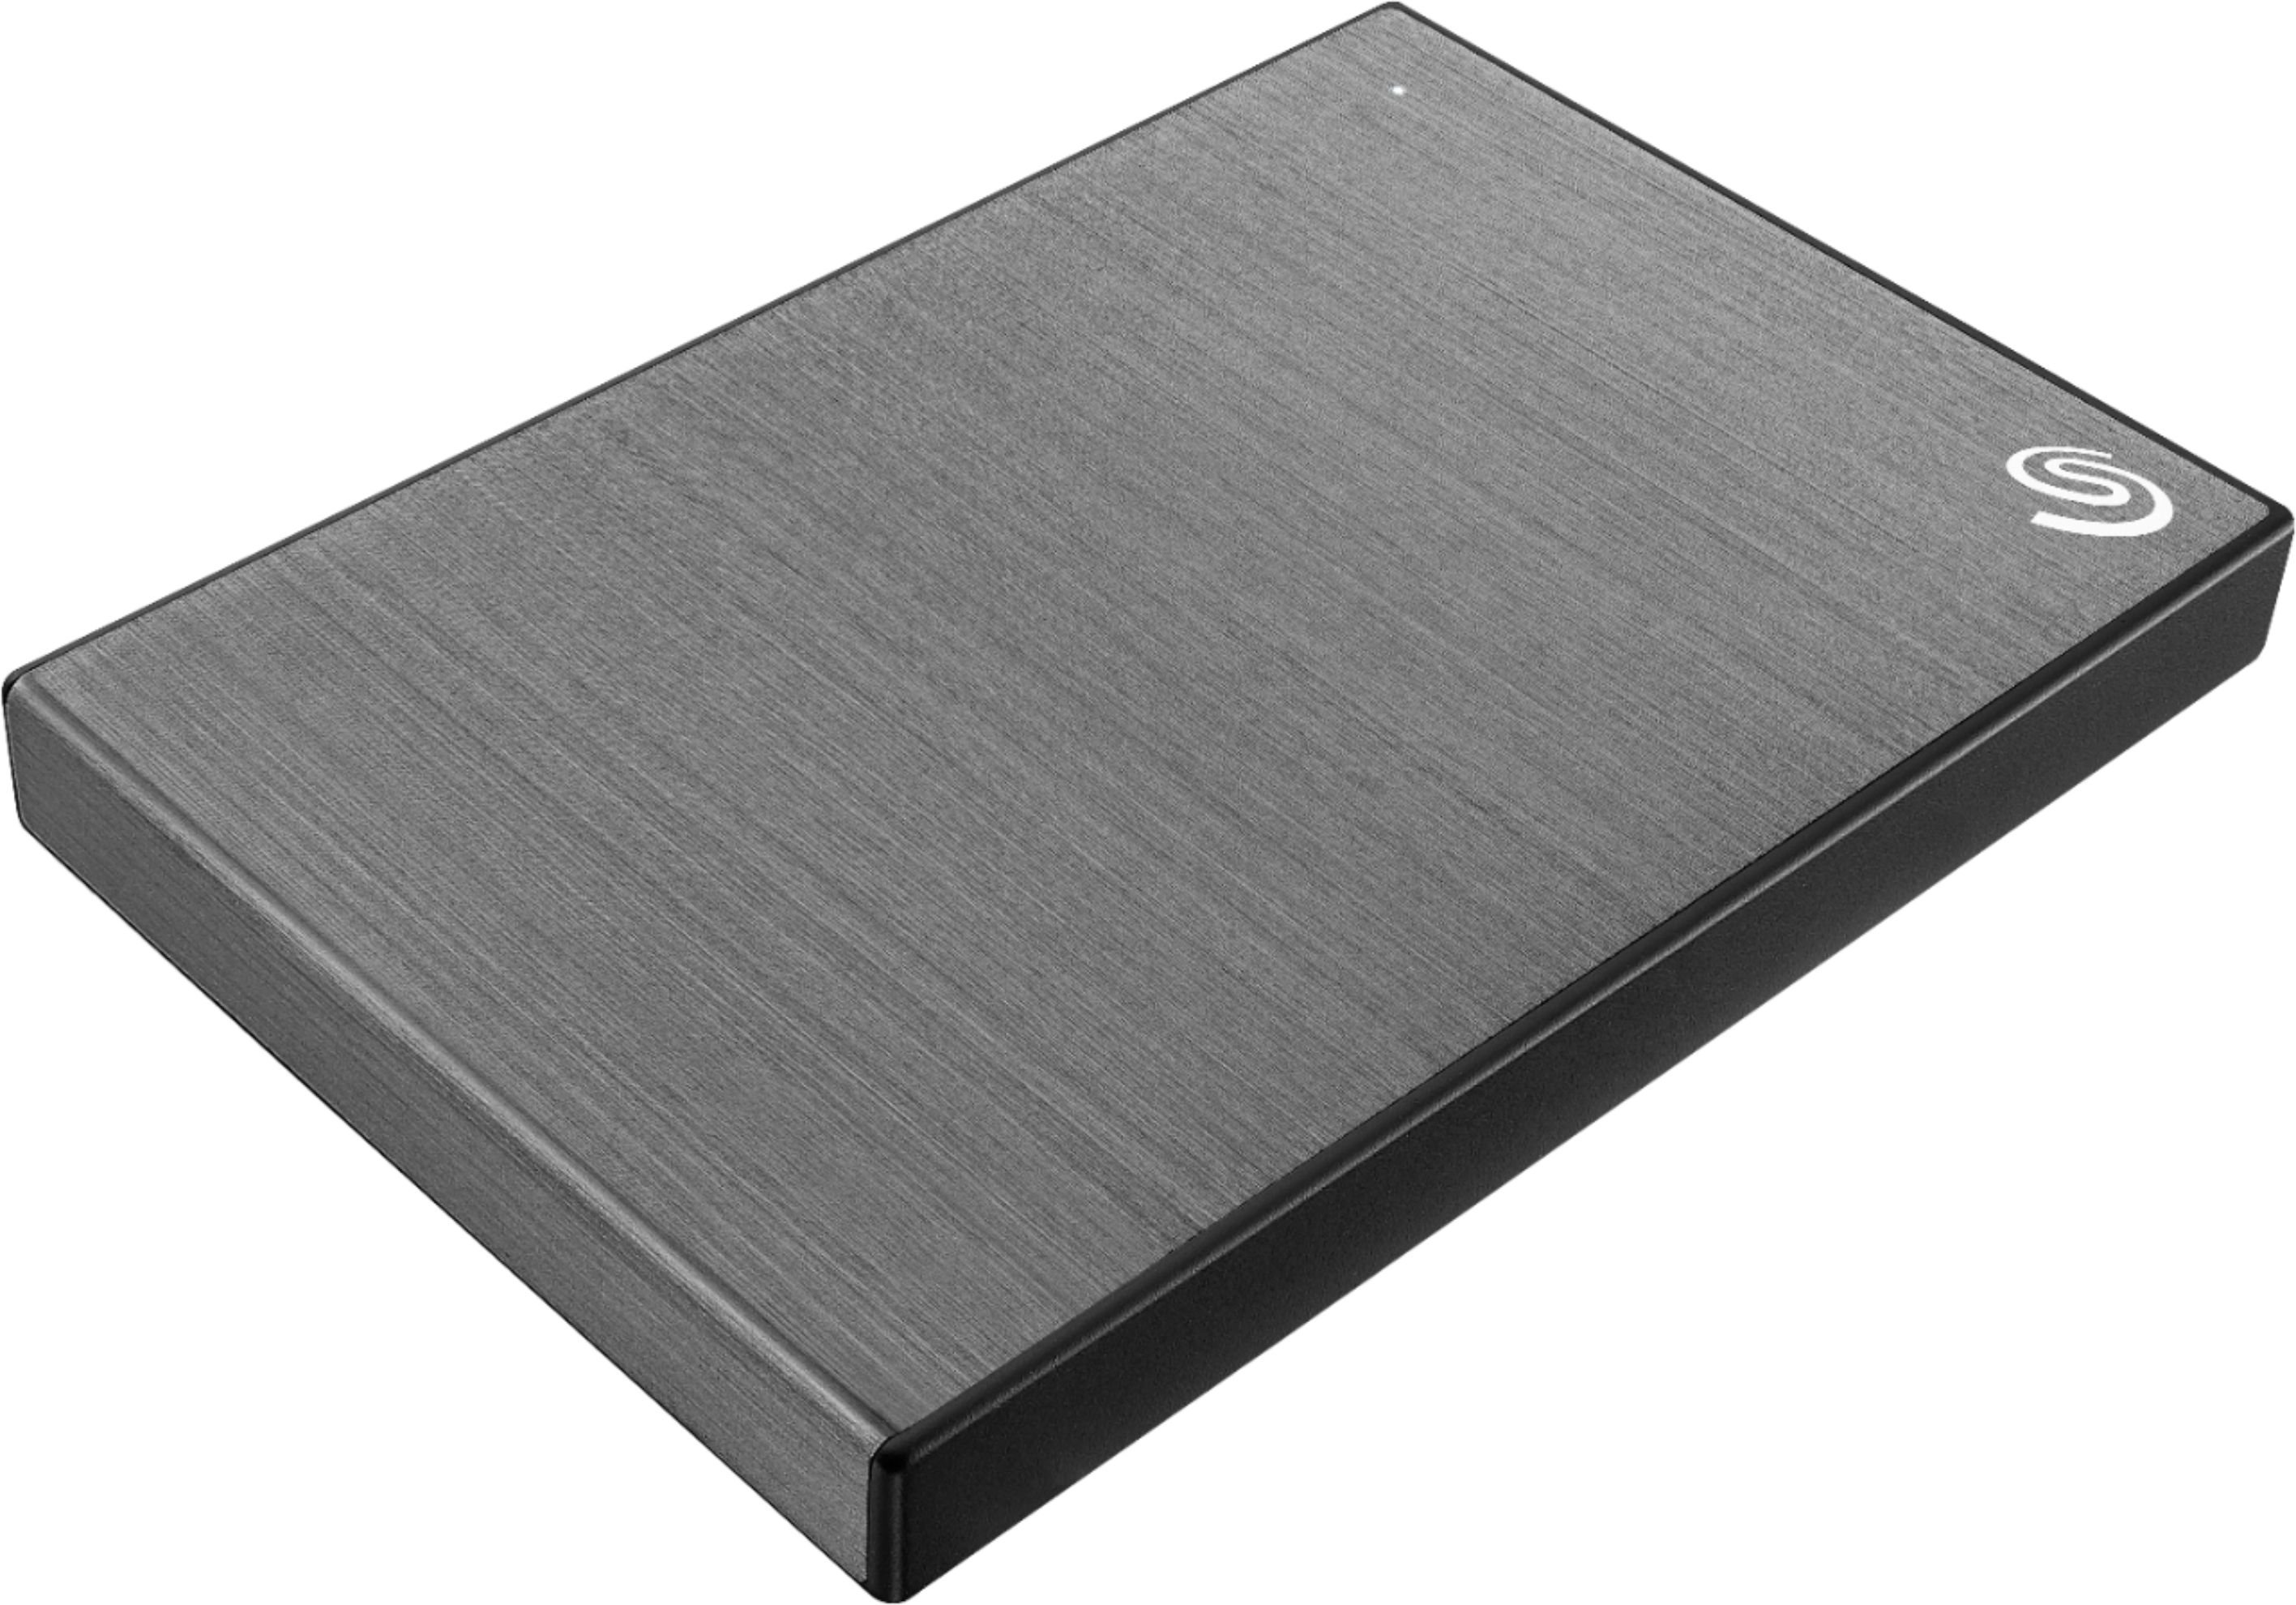 Angle View: Seagate - One Touch 1TB External USB 3.0 Portable Hard Drive with Rescue Data Recovery Services - Space Gray